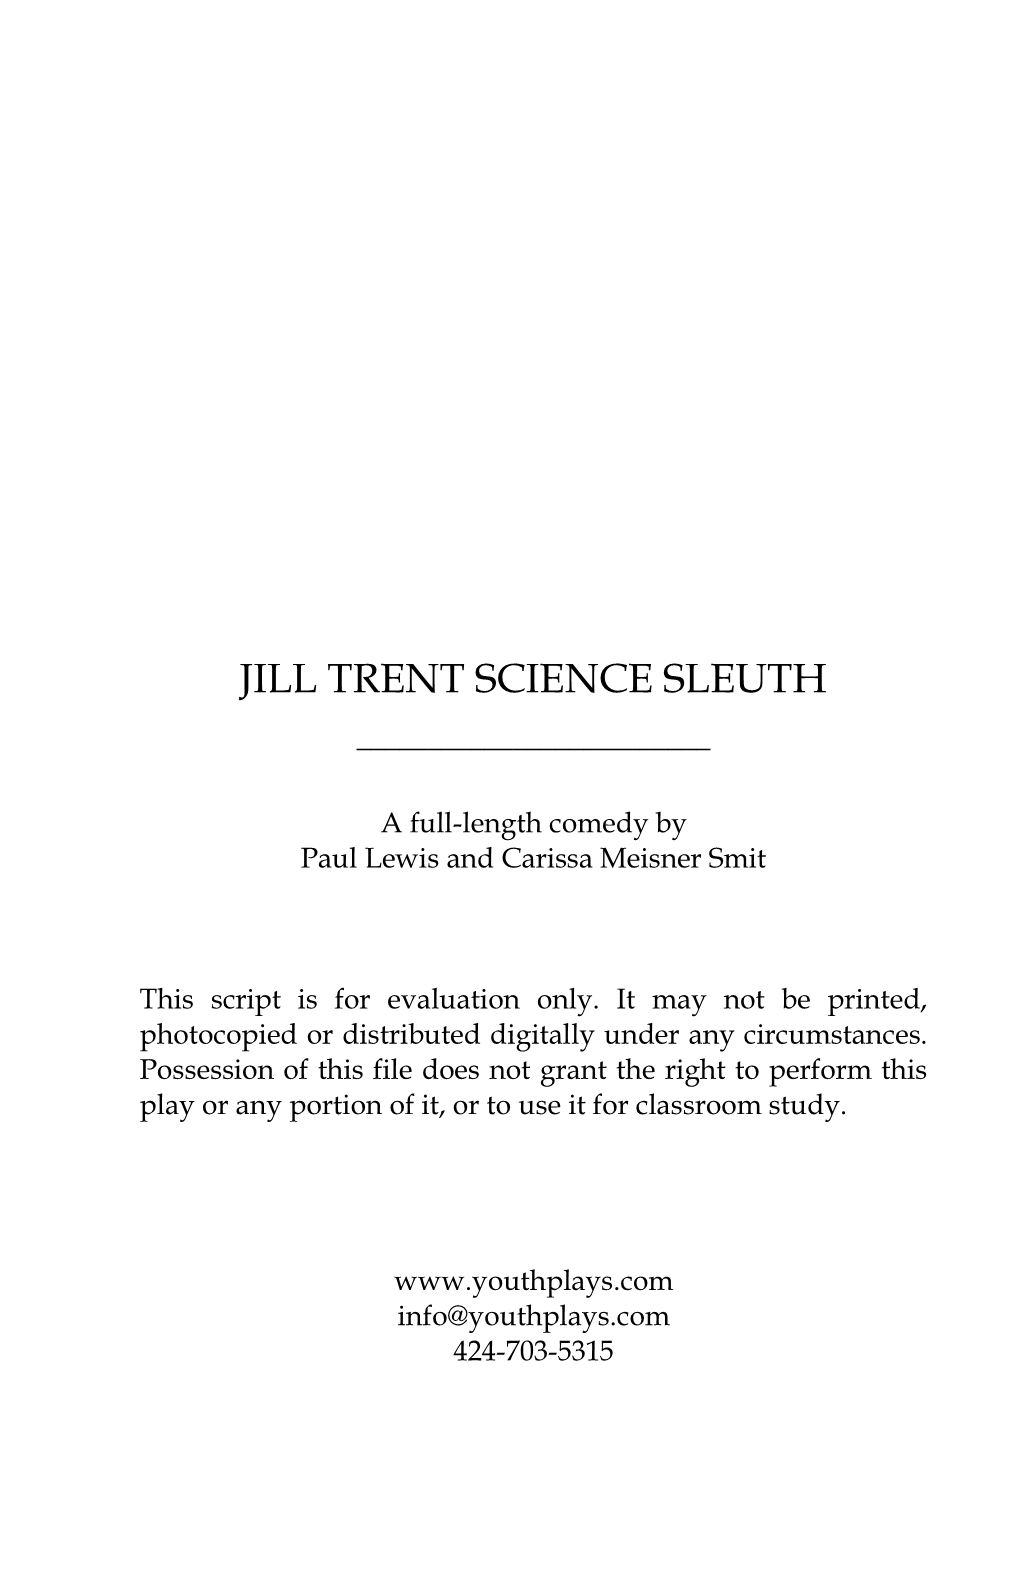 Jill Trent Science Sleuth ______